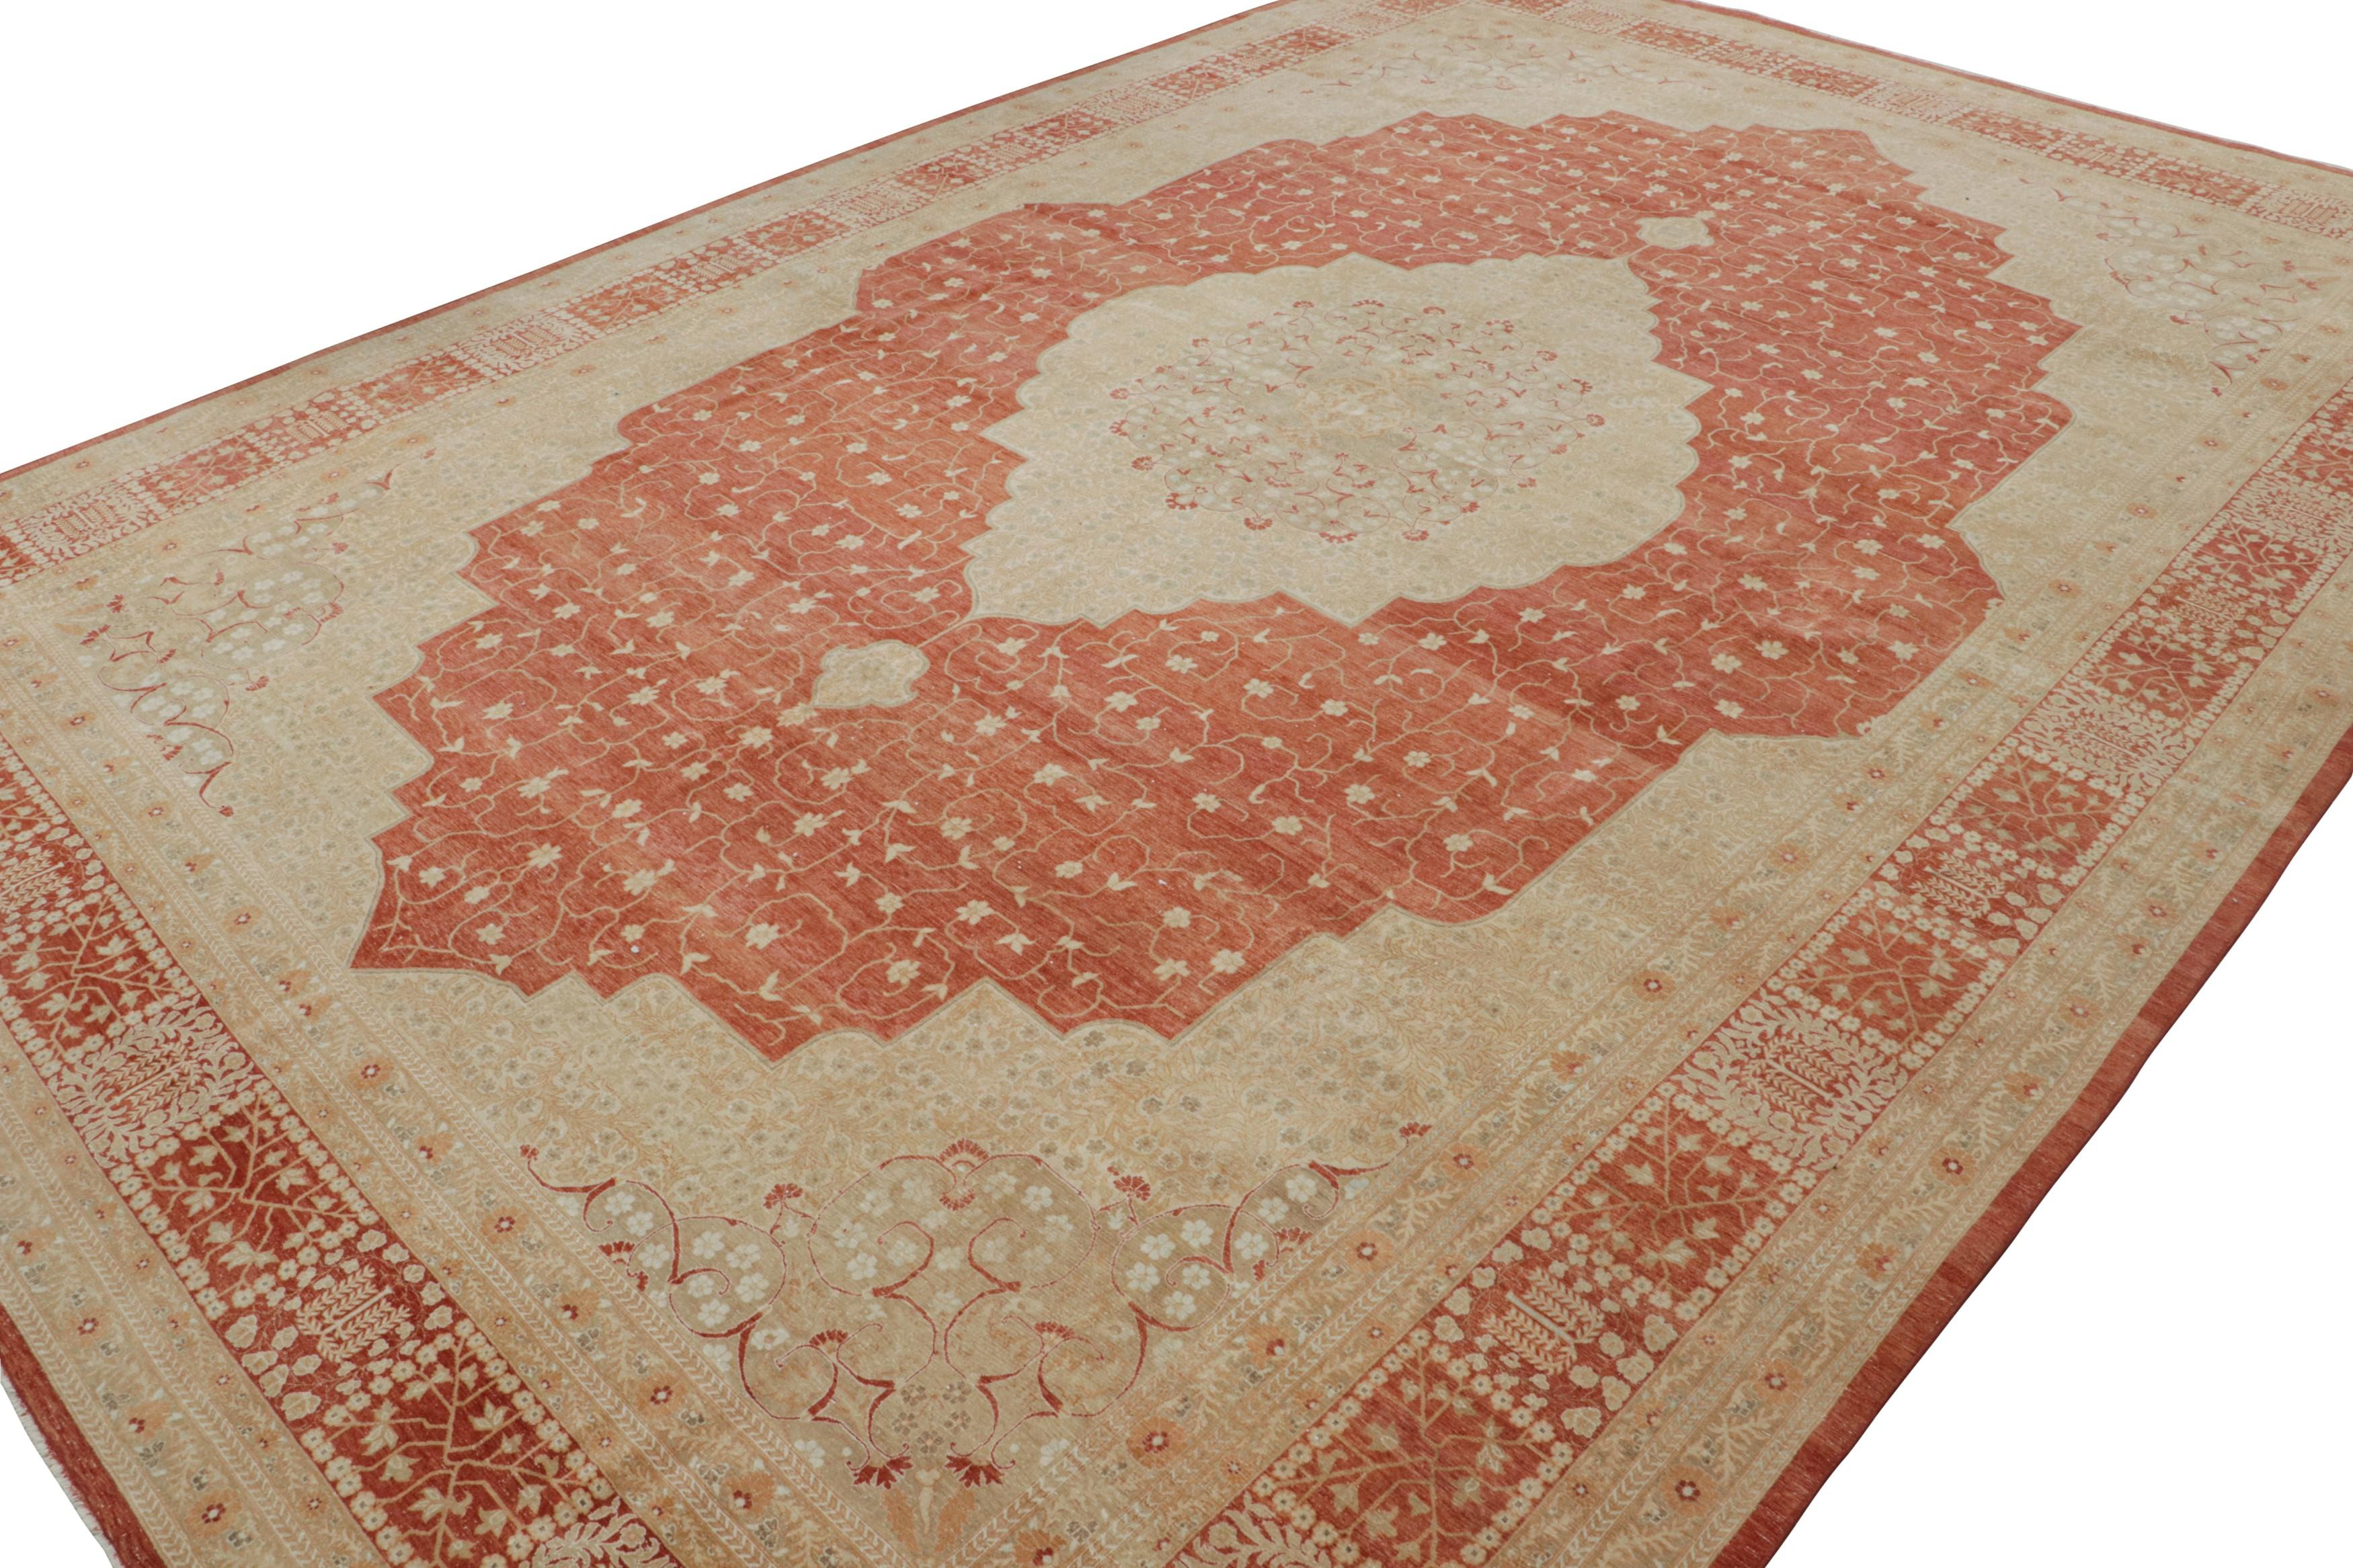 Hand-knotted in wool, this 12x17 oversized rug has been inspired by Persian Tabriz rugs. It is an homage to the regal masterpieces of one of history’s most revered weavers, Hadji Jalili. 

On the Design: 

Featuring beige medallion and intricate